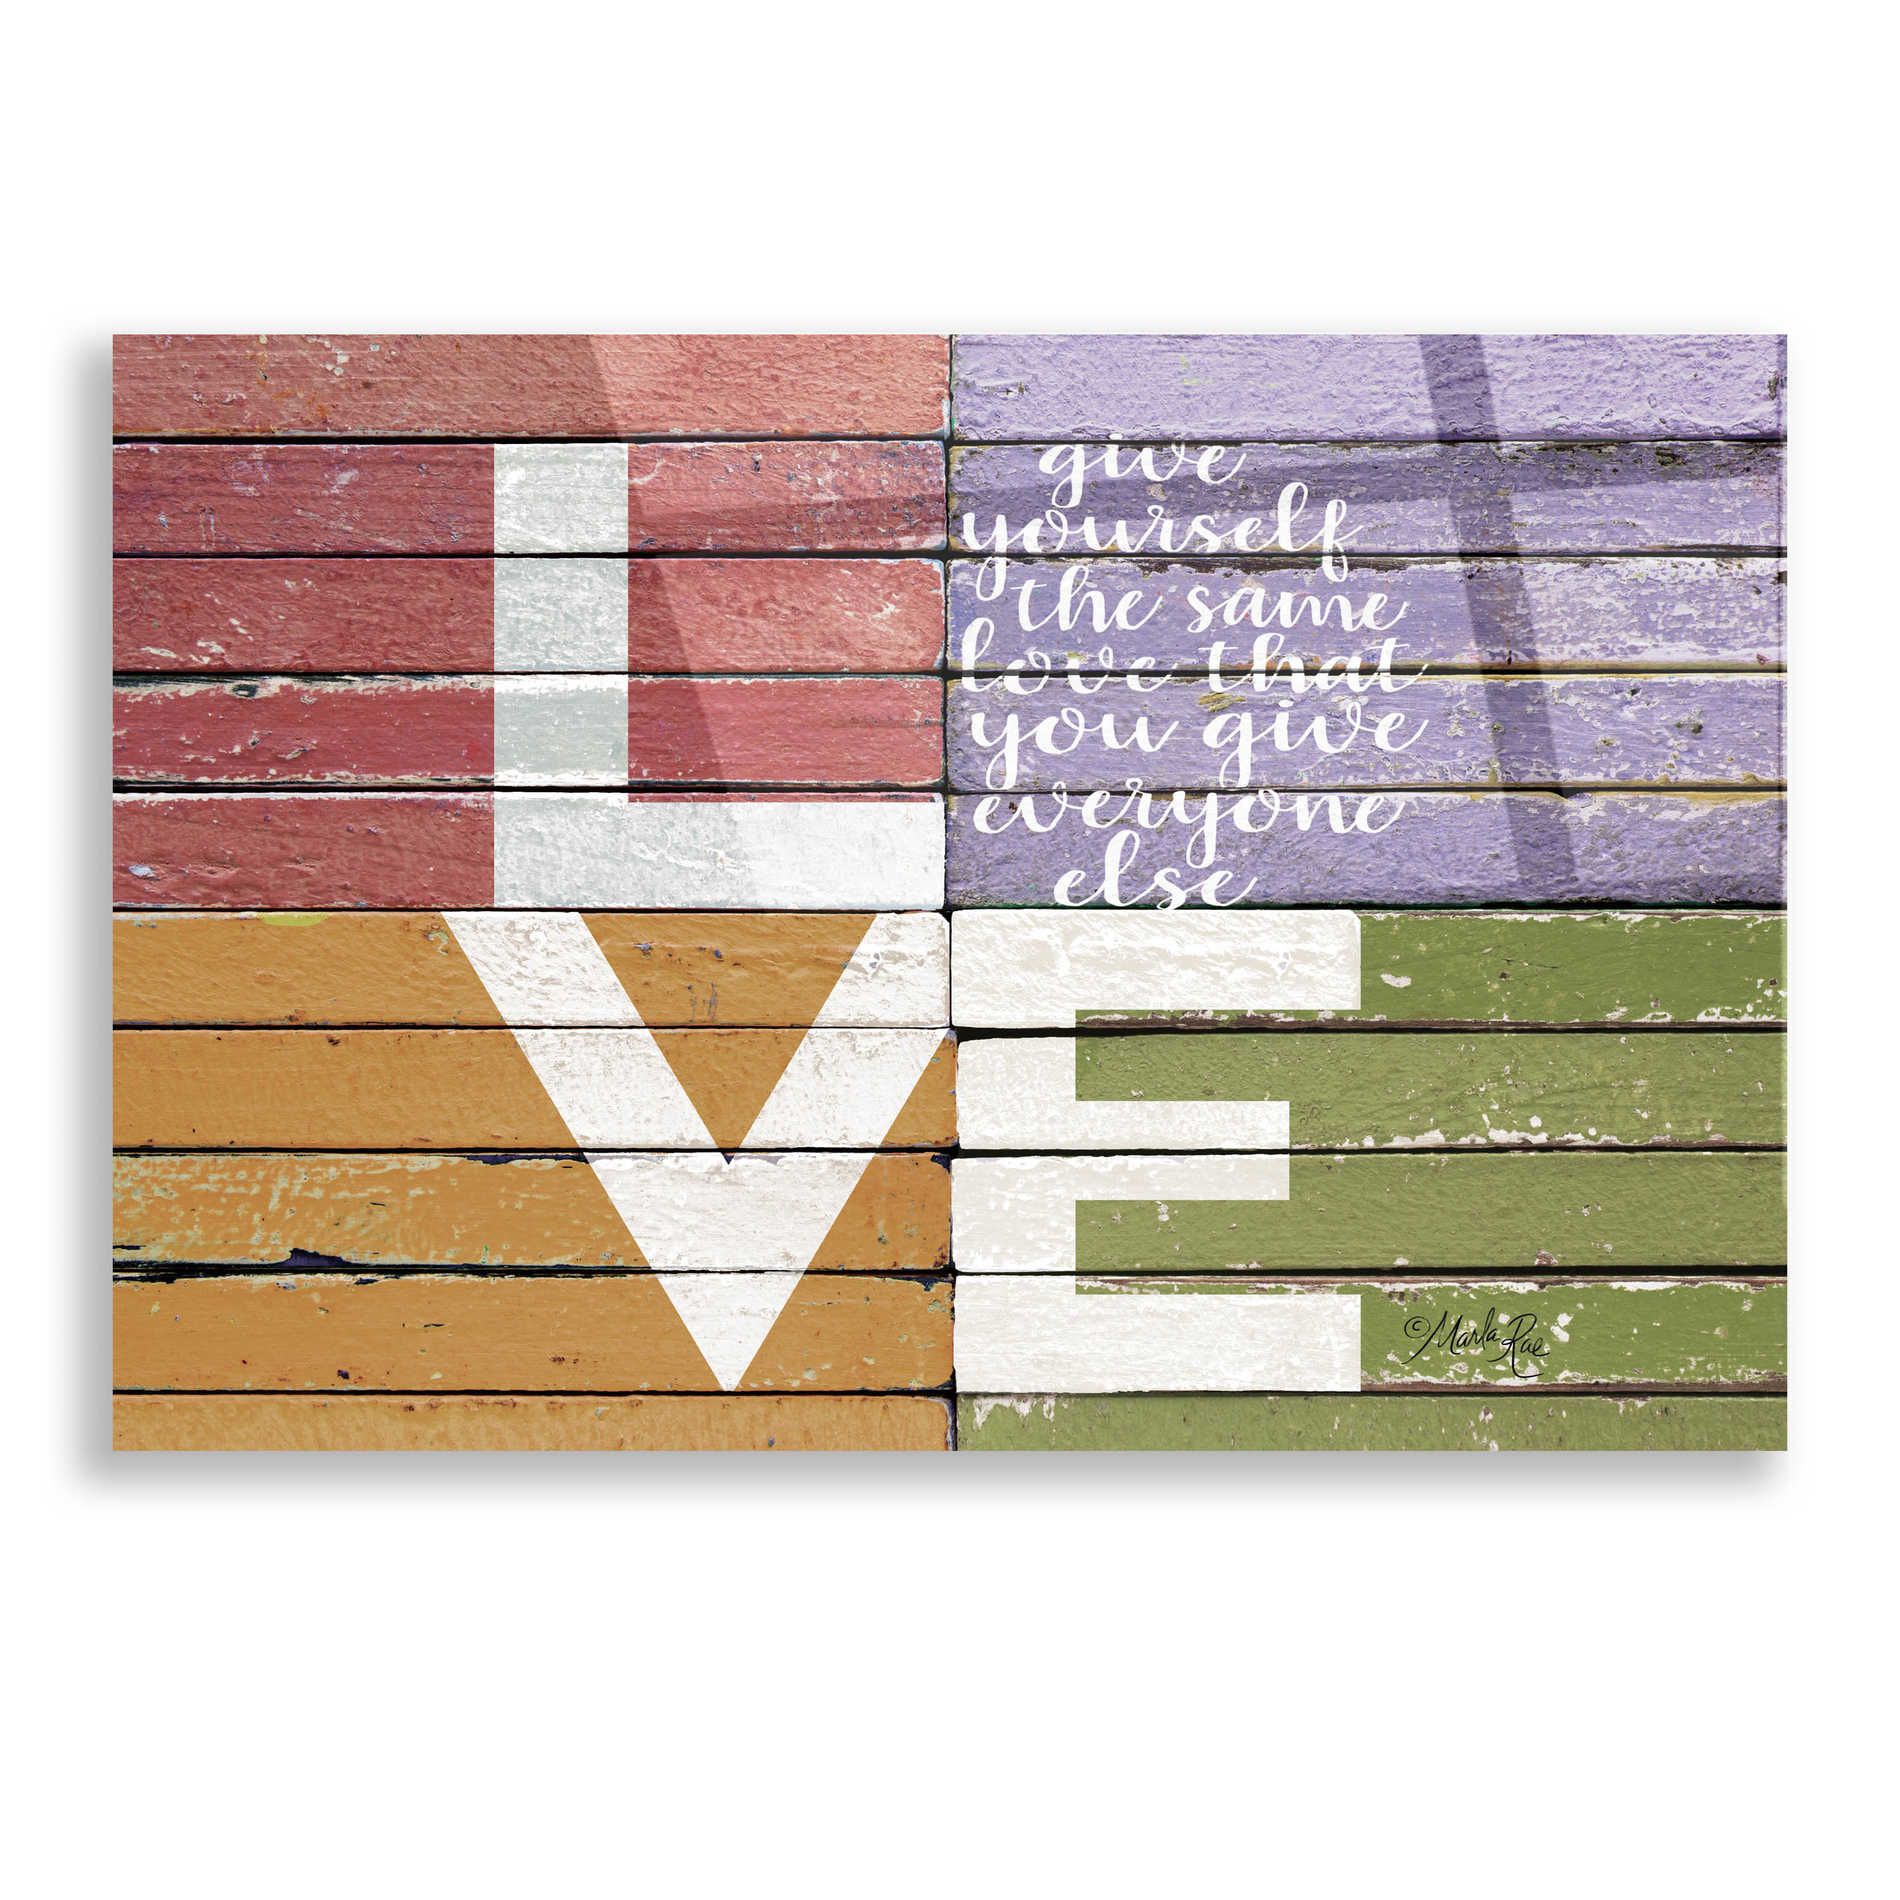 Epic Art 'Give Yourself the Same Love' by Marla Rae, Acrylic Glass Wall Art